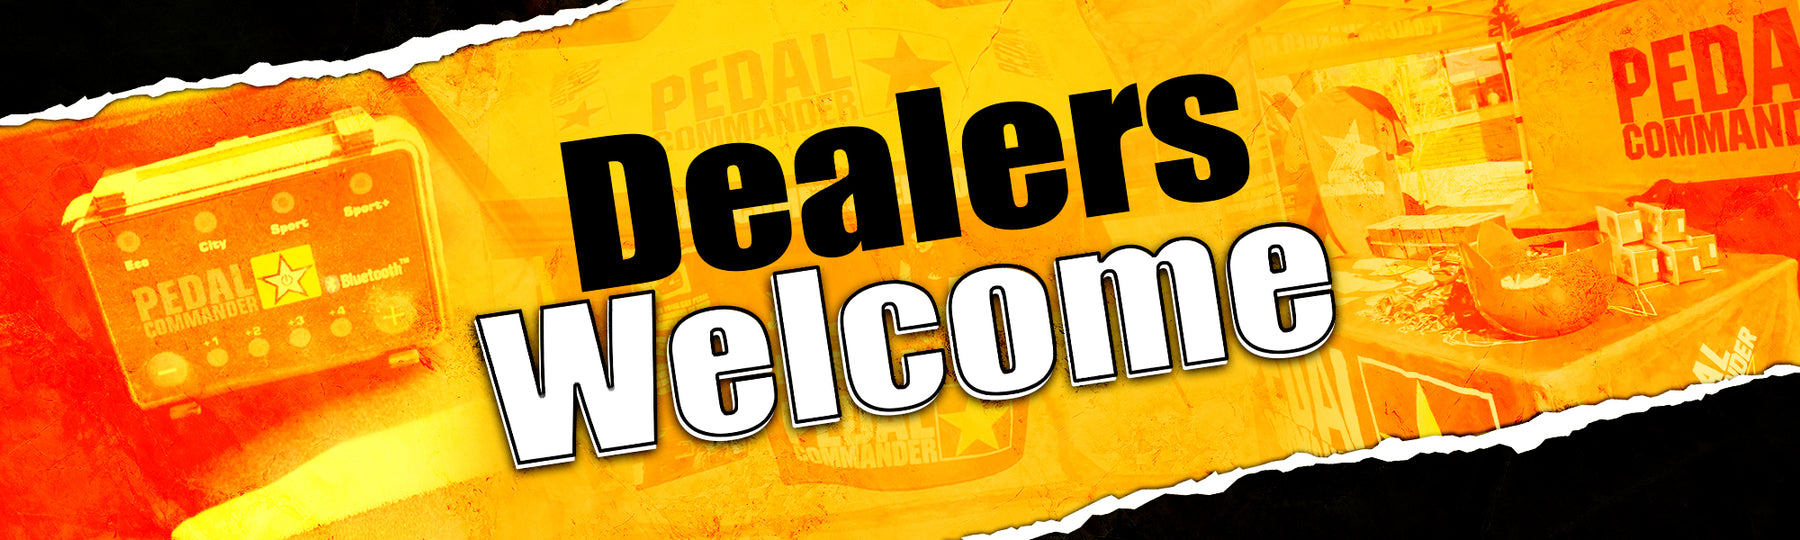 pedal commander merchant welcomes the dealers